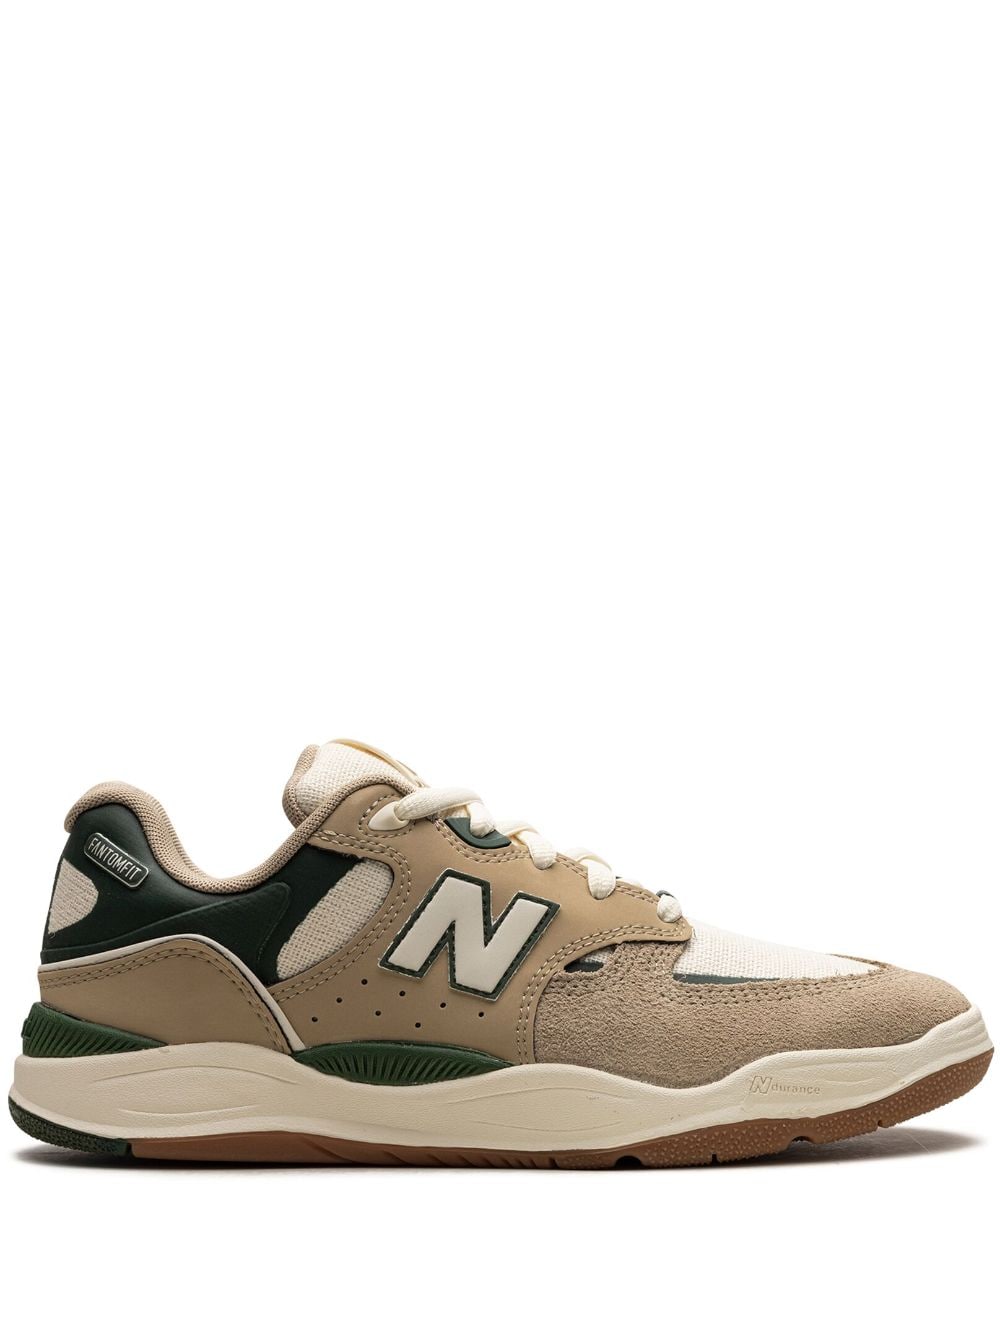 New Balance Numeric 1010 "Brown / Green" sneakers